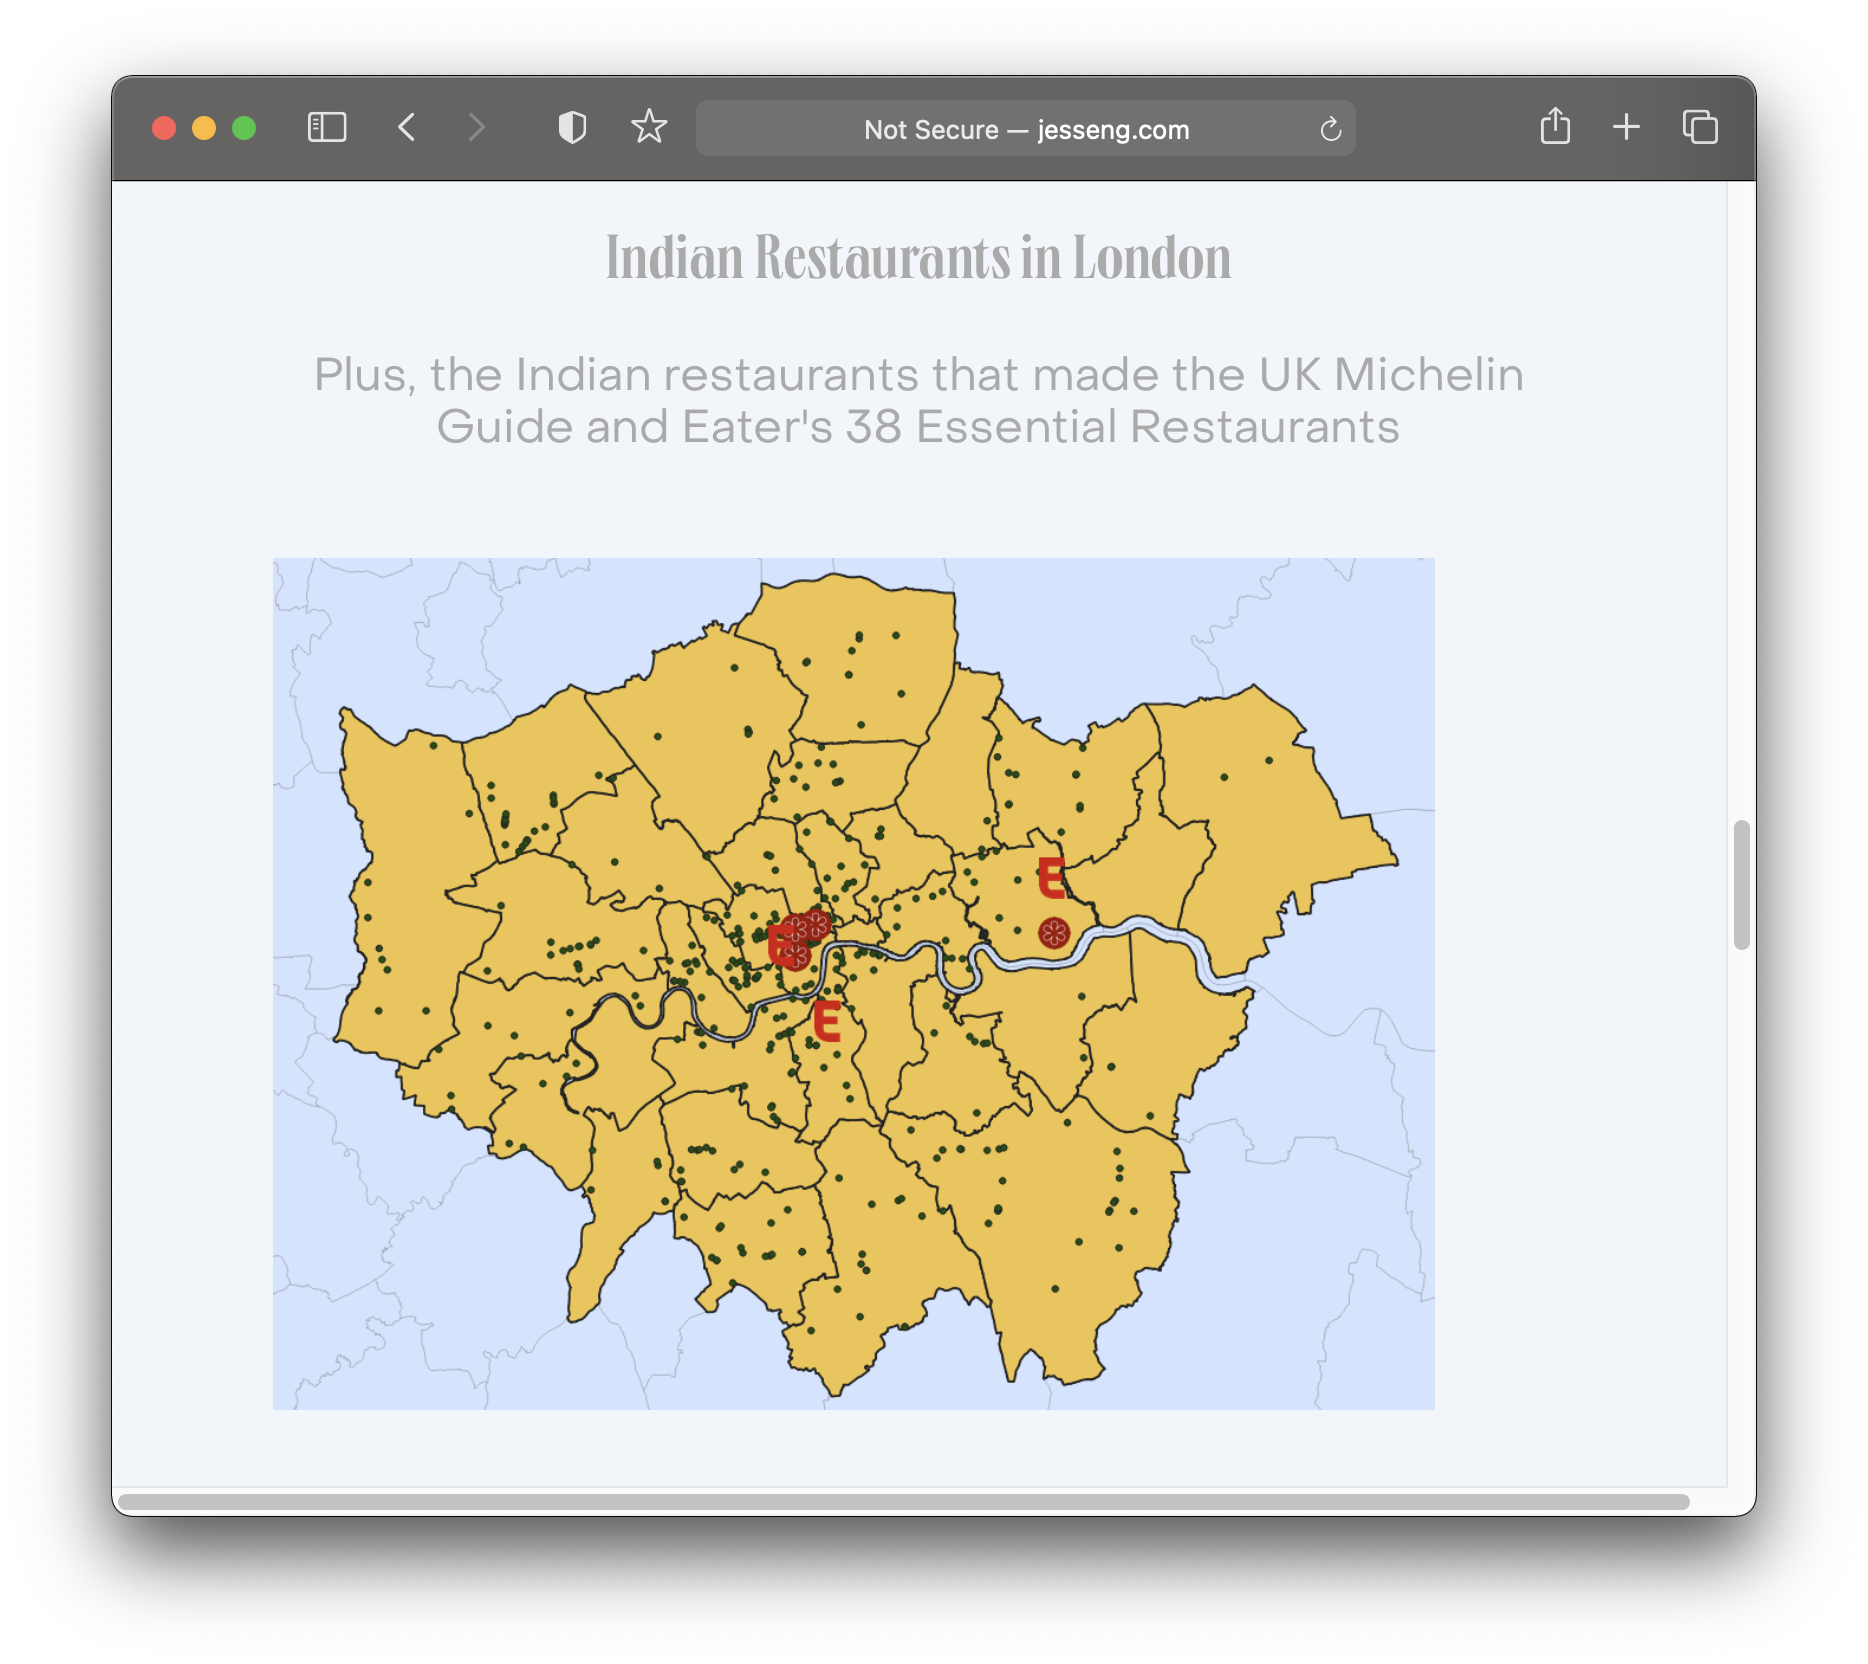 map of london with dots showing the locations of Indian restaurants